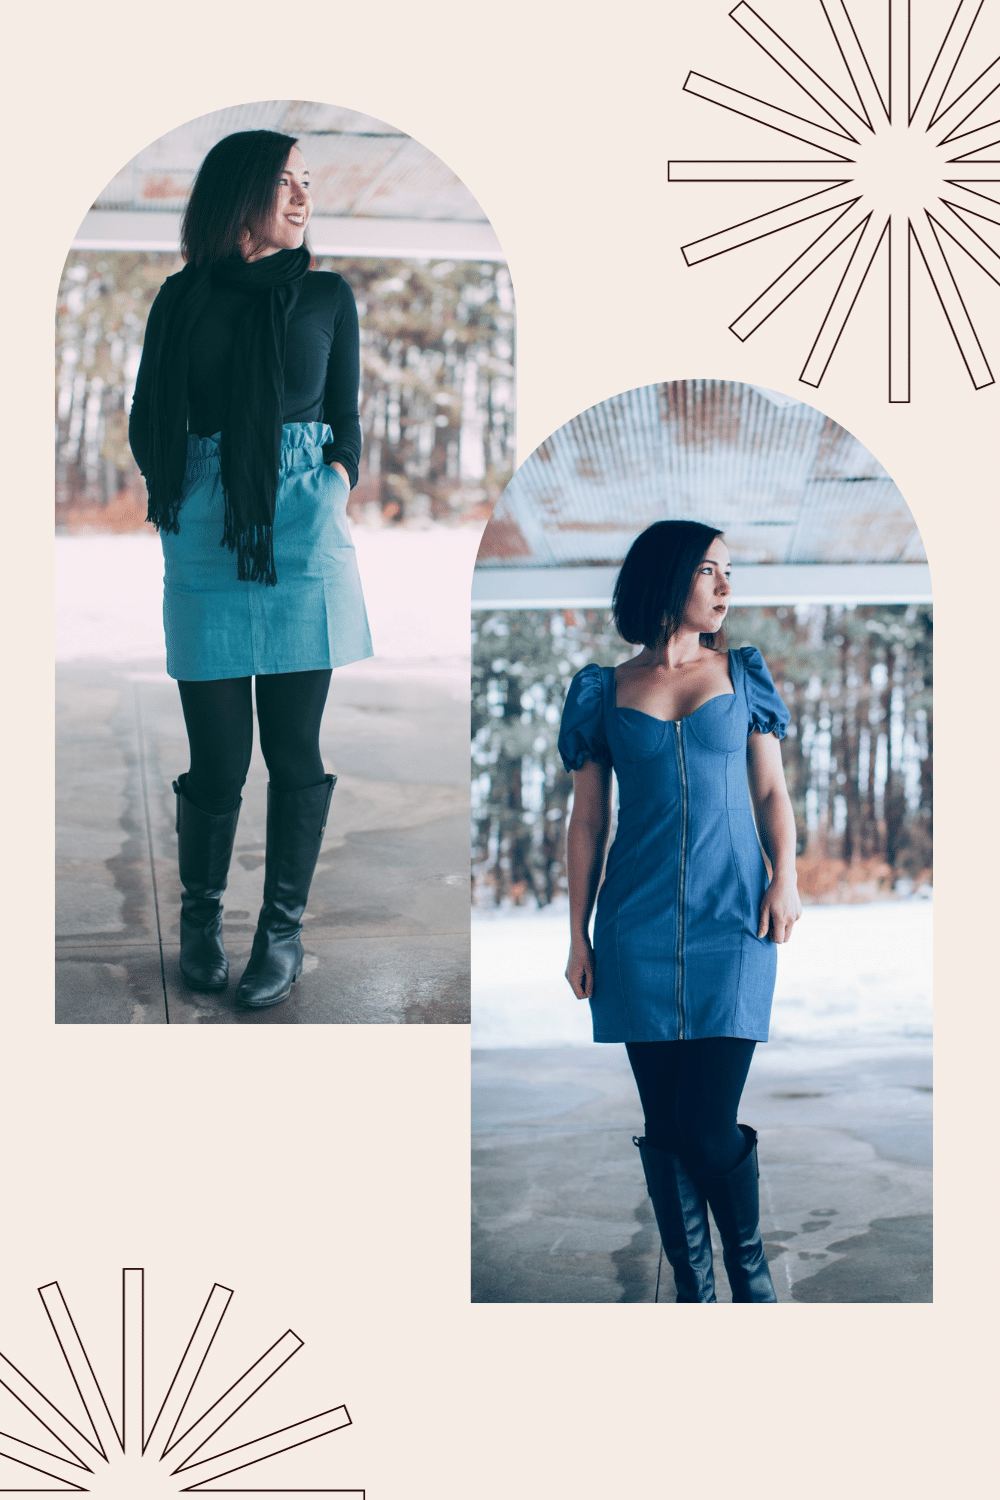 Trying Trends - Styling a Denim Skirt & Dress With Leggings +